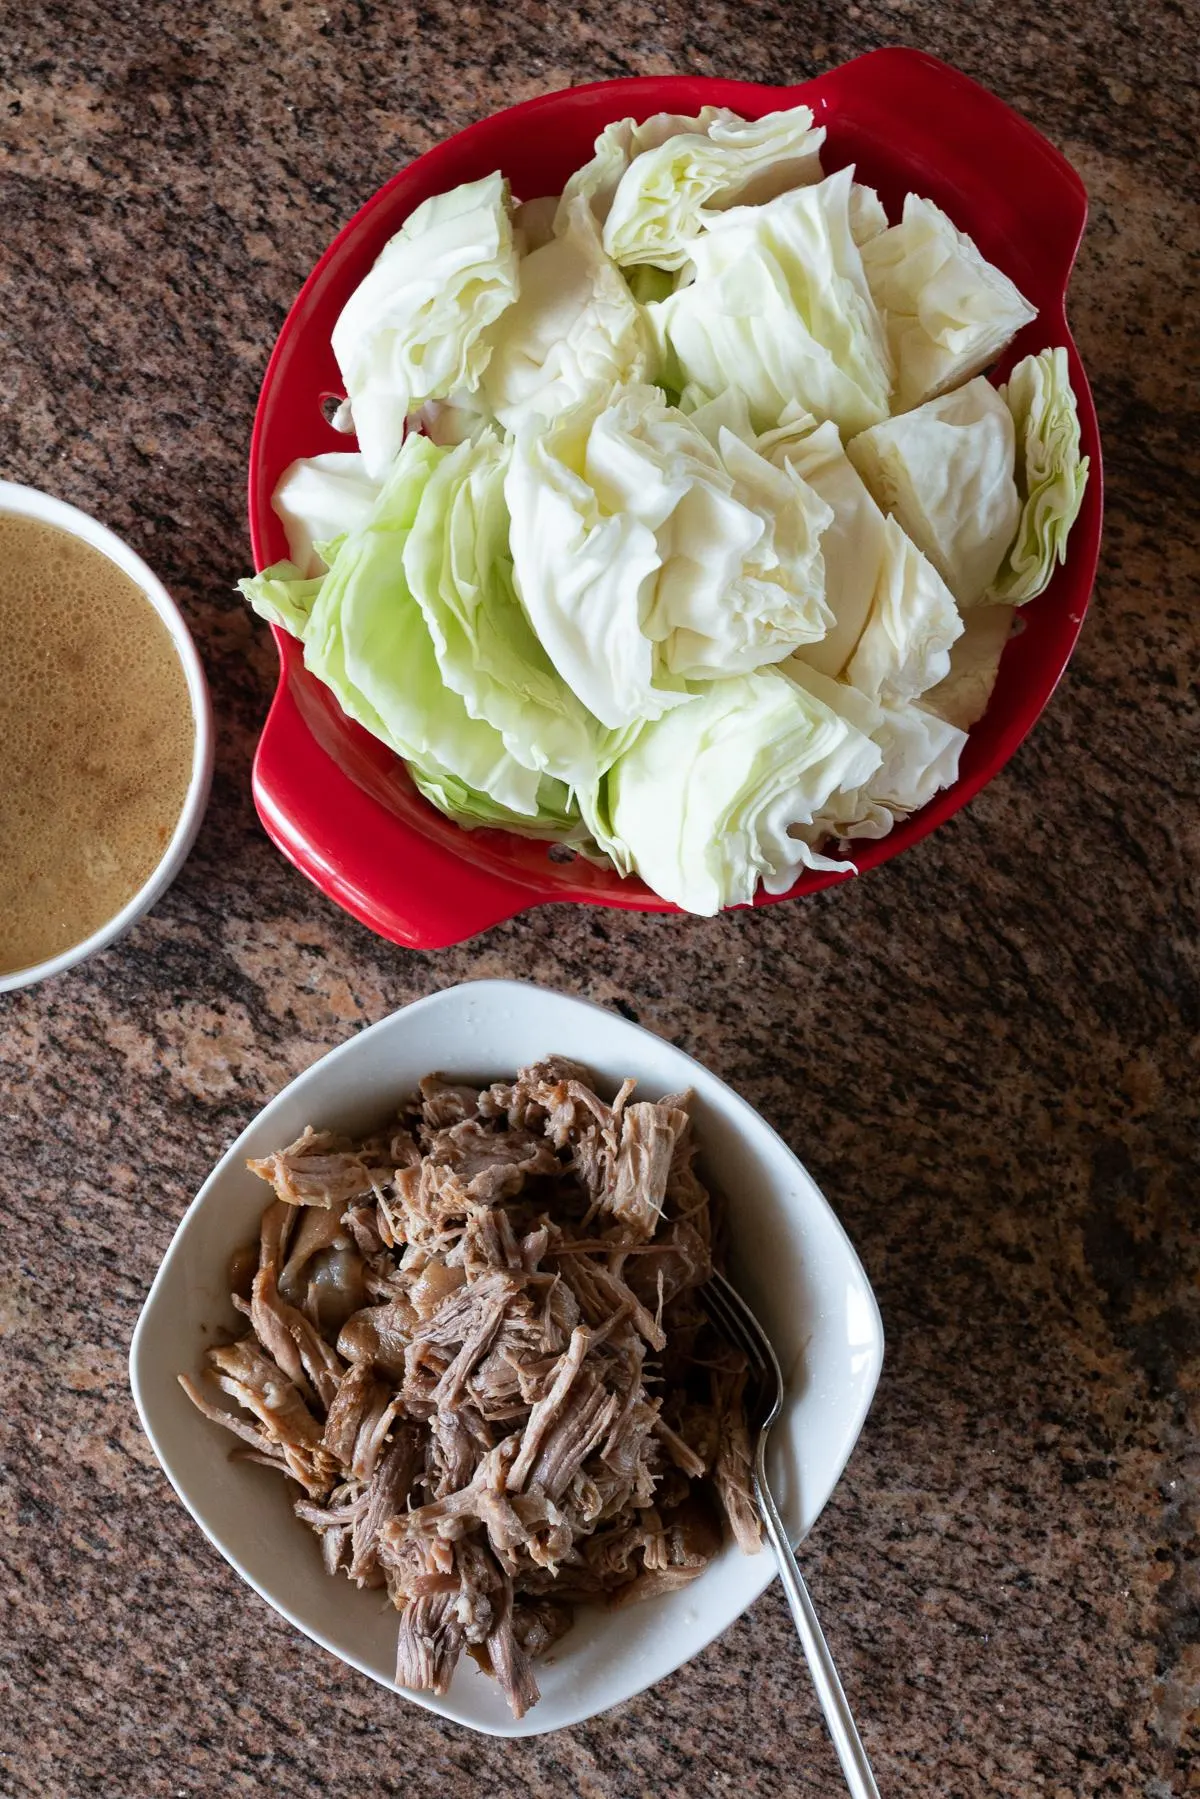 Ingredients for Kalua Pork and Cabbage: kalua pork, cabbage, and kalua pork drippings/juices (or chicken broth)